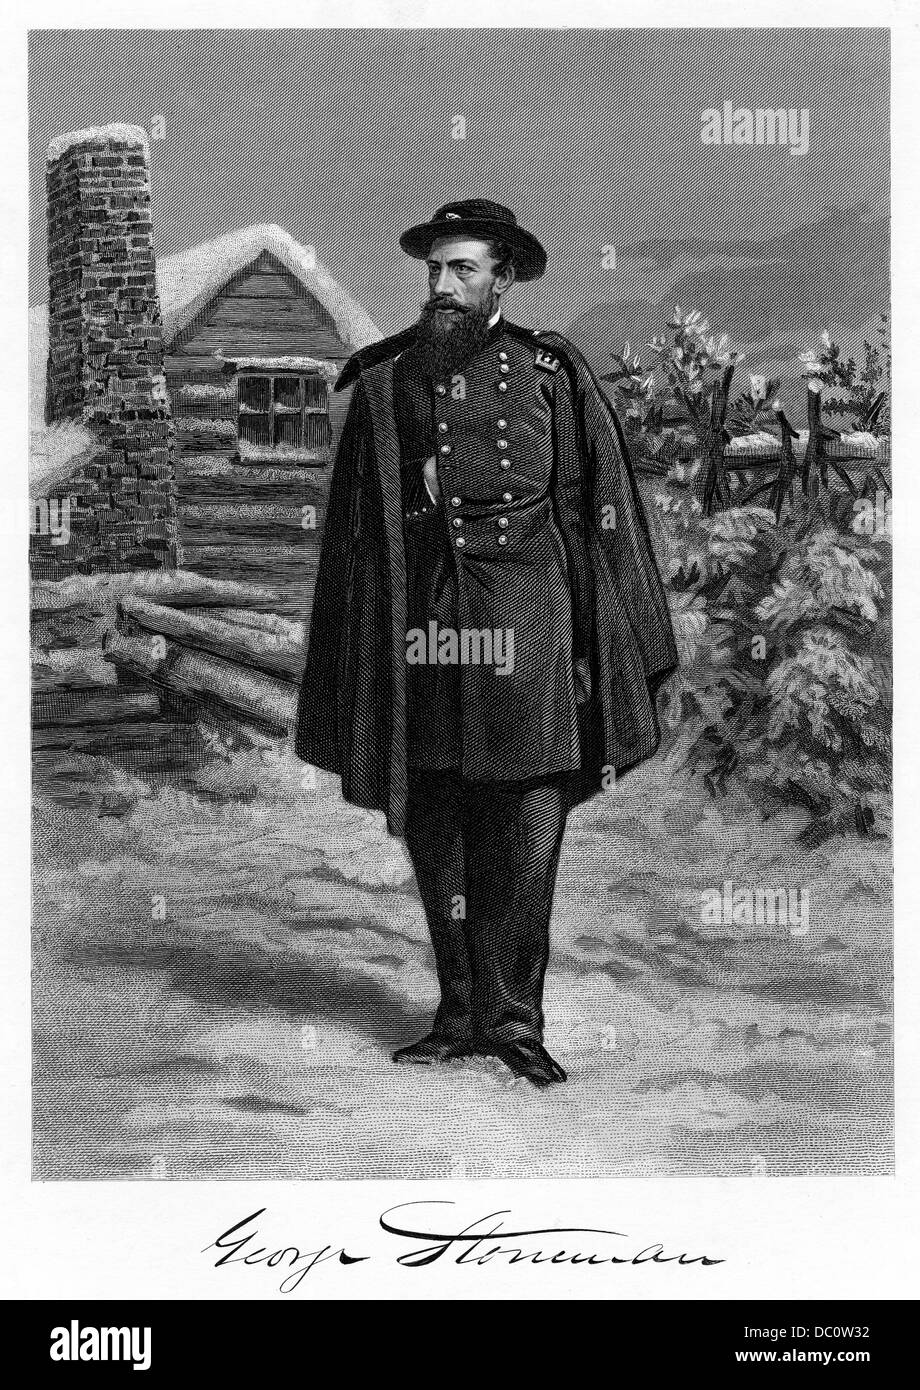 1860s STANDING WINTER PORTRAIT UNION ARMY GENERAL GEORGE STONEMAN DURING THE AMERICAN CIVIL WAR AND LATER GOVERNOR OF CALIFORNIA Stock Photo